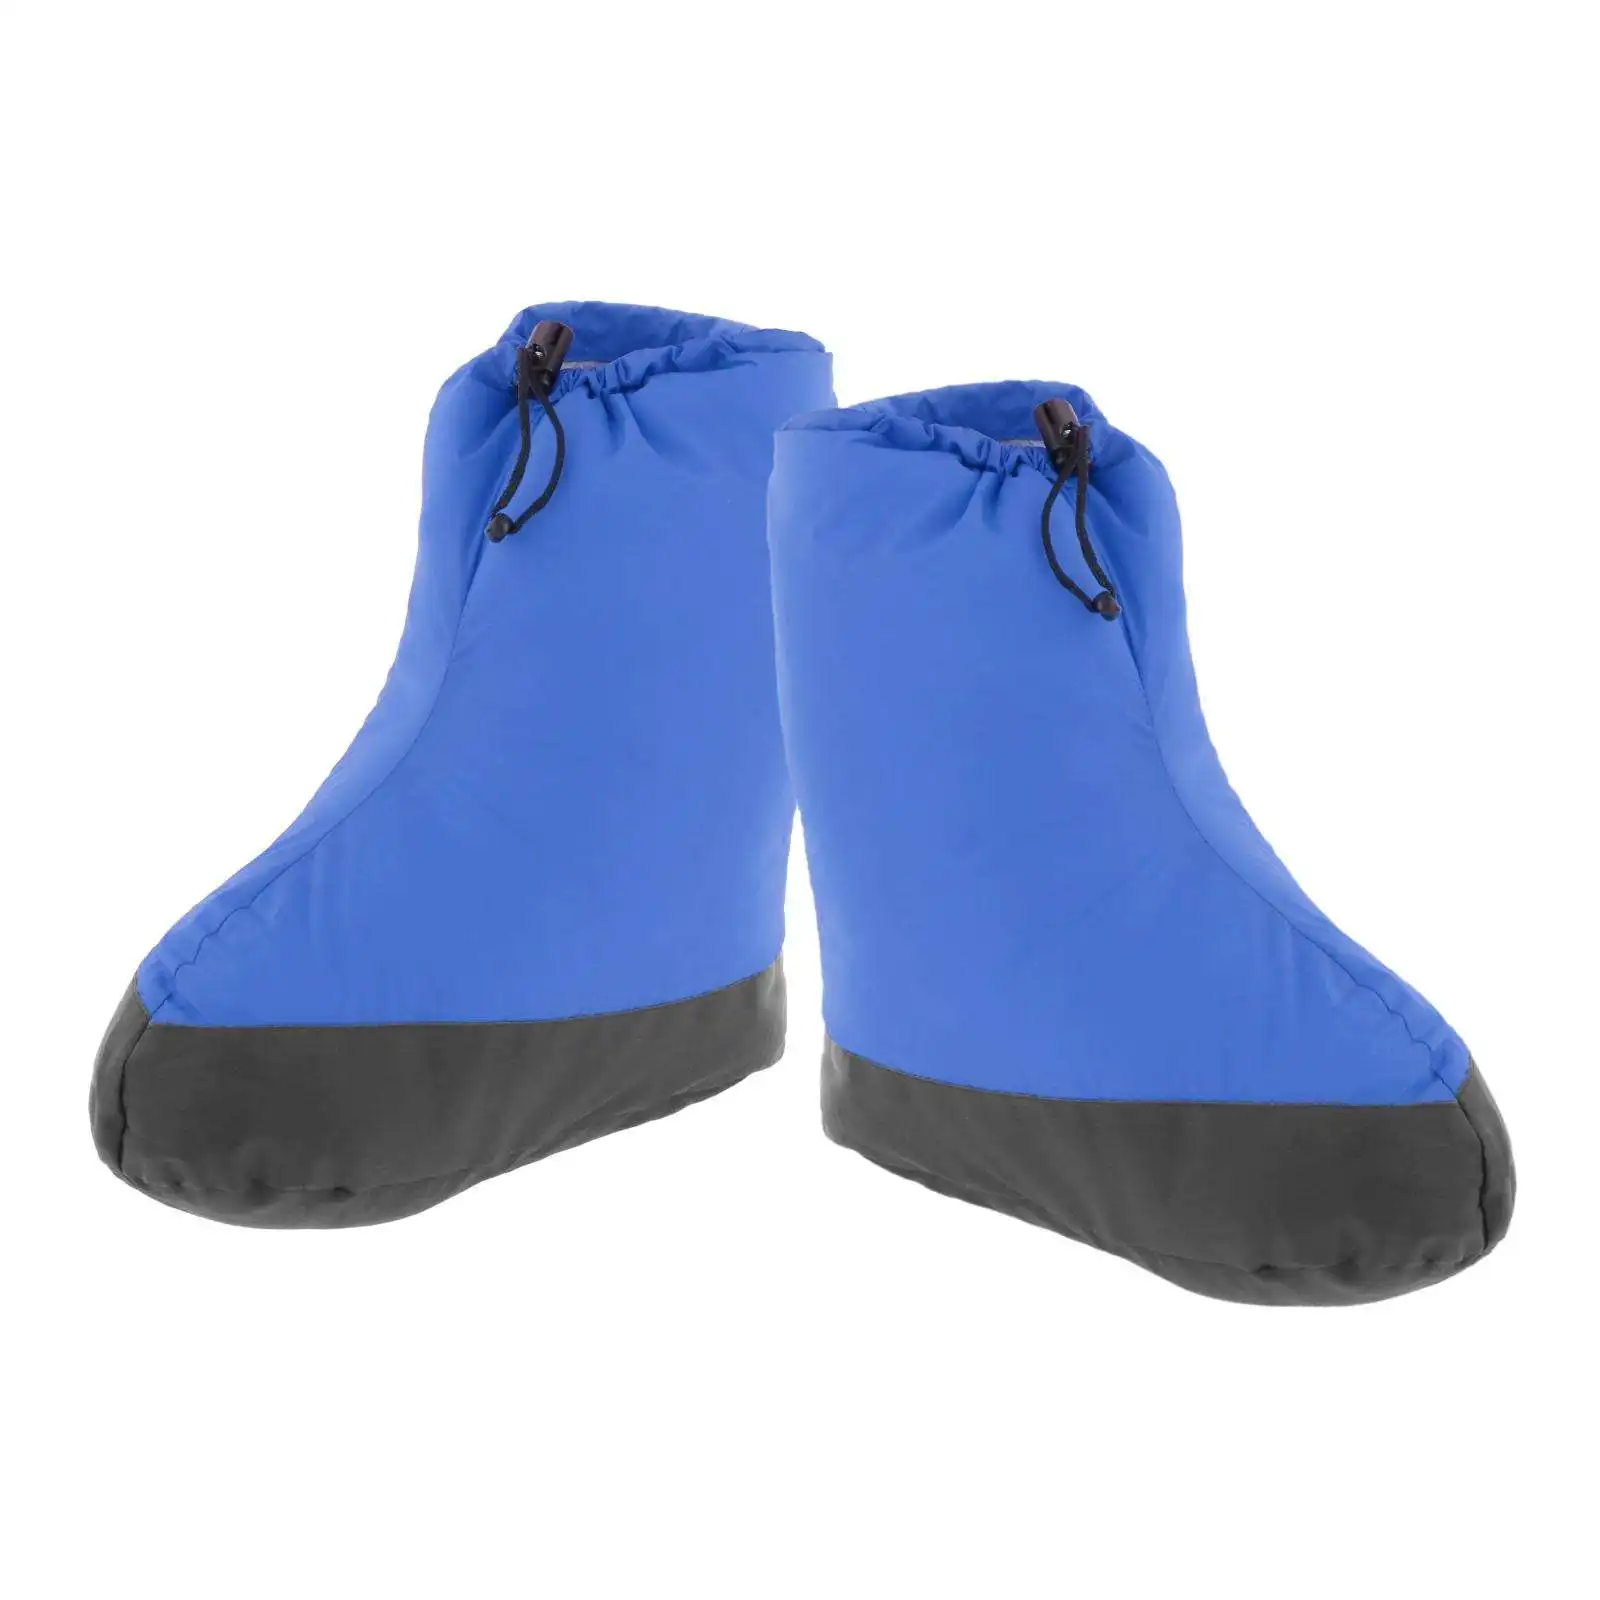 Down Booties Water-Resistant Warm Ultralight Winter Down Filled Slipper Boots Socks Slippers for Backpacking Camping Outdoor